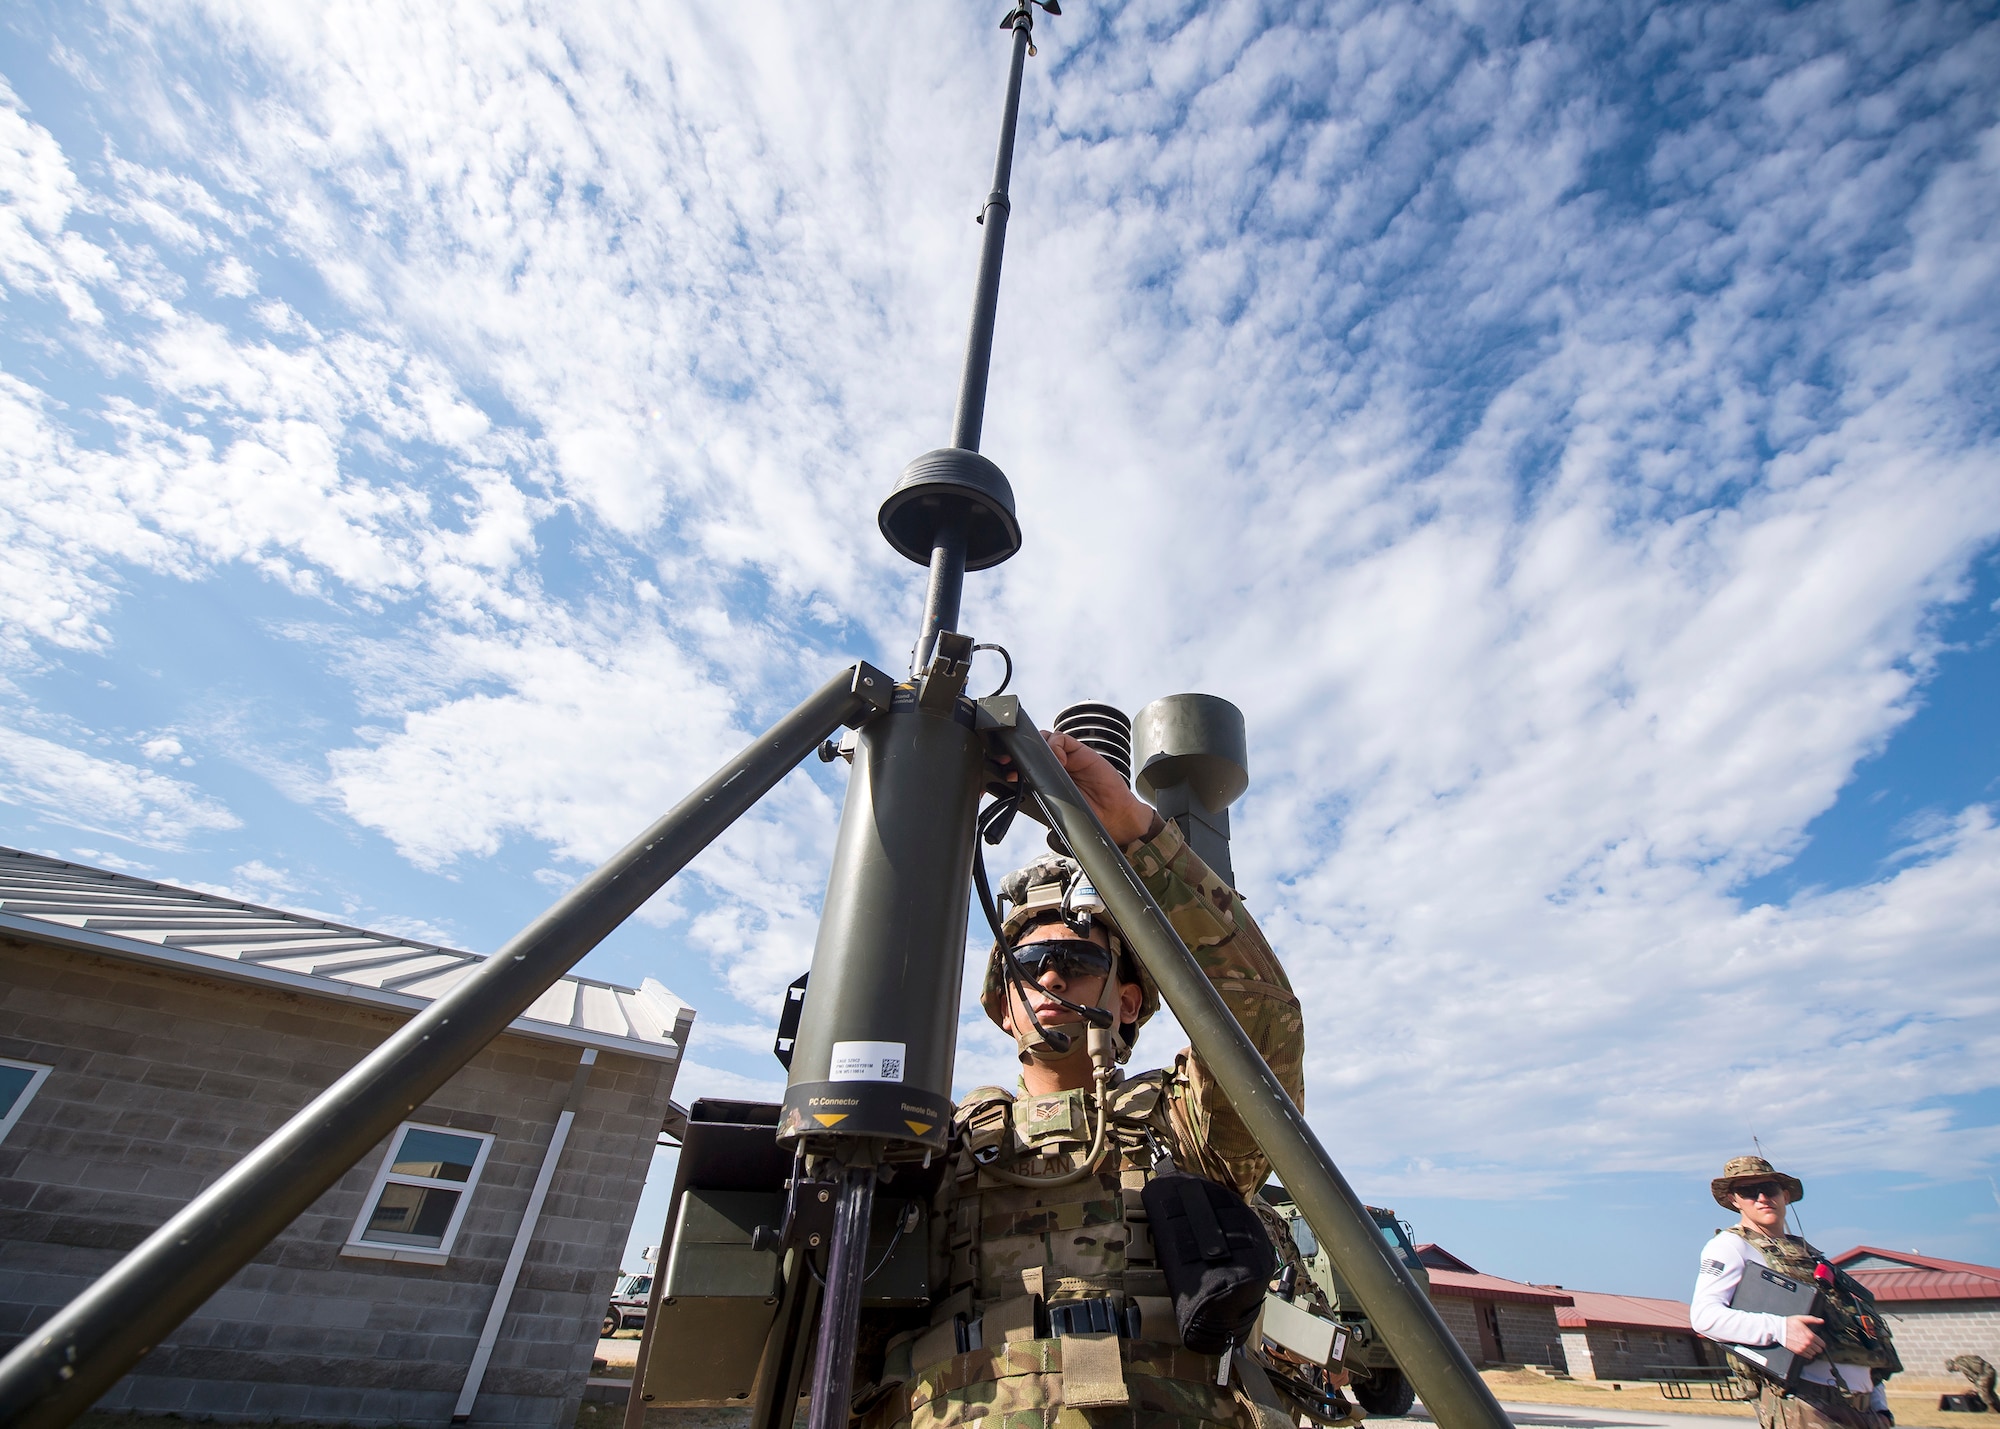 Senior Airman Isidro Sablan, 3d Weather Squadron (WS) weather forecaster, assembles a tactical meteorological observing system during a certification field exercise (CFX), July 29, 2019, at Camp Bowie Training Center, Texas. The CFX was designed to evaluate the squadron’s overall tactical ability and readiness to provide the U.S. Army with full spectrum environmental support to the Joint Task Force (JTF) fight. While deployed, the Army relies on the 3d WS to provide them with current ground weather reports. These reports are then employed by commanders on the ground as they plan the best tactics and approaches to accomplish the mission. (U.S. Air Force photo by Airman 1st Class Eugene Oliver)